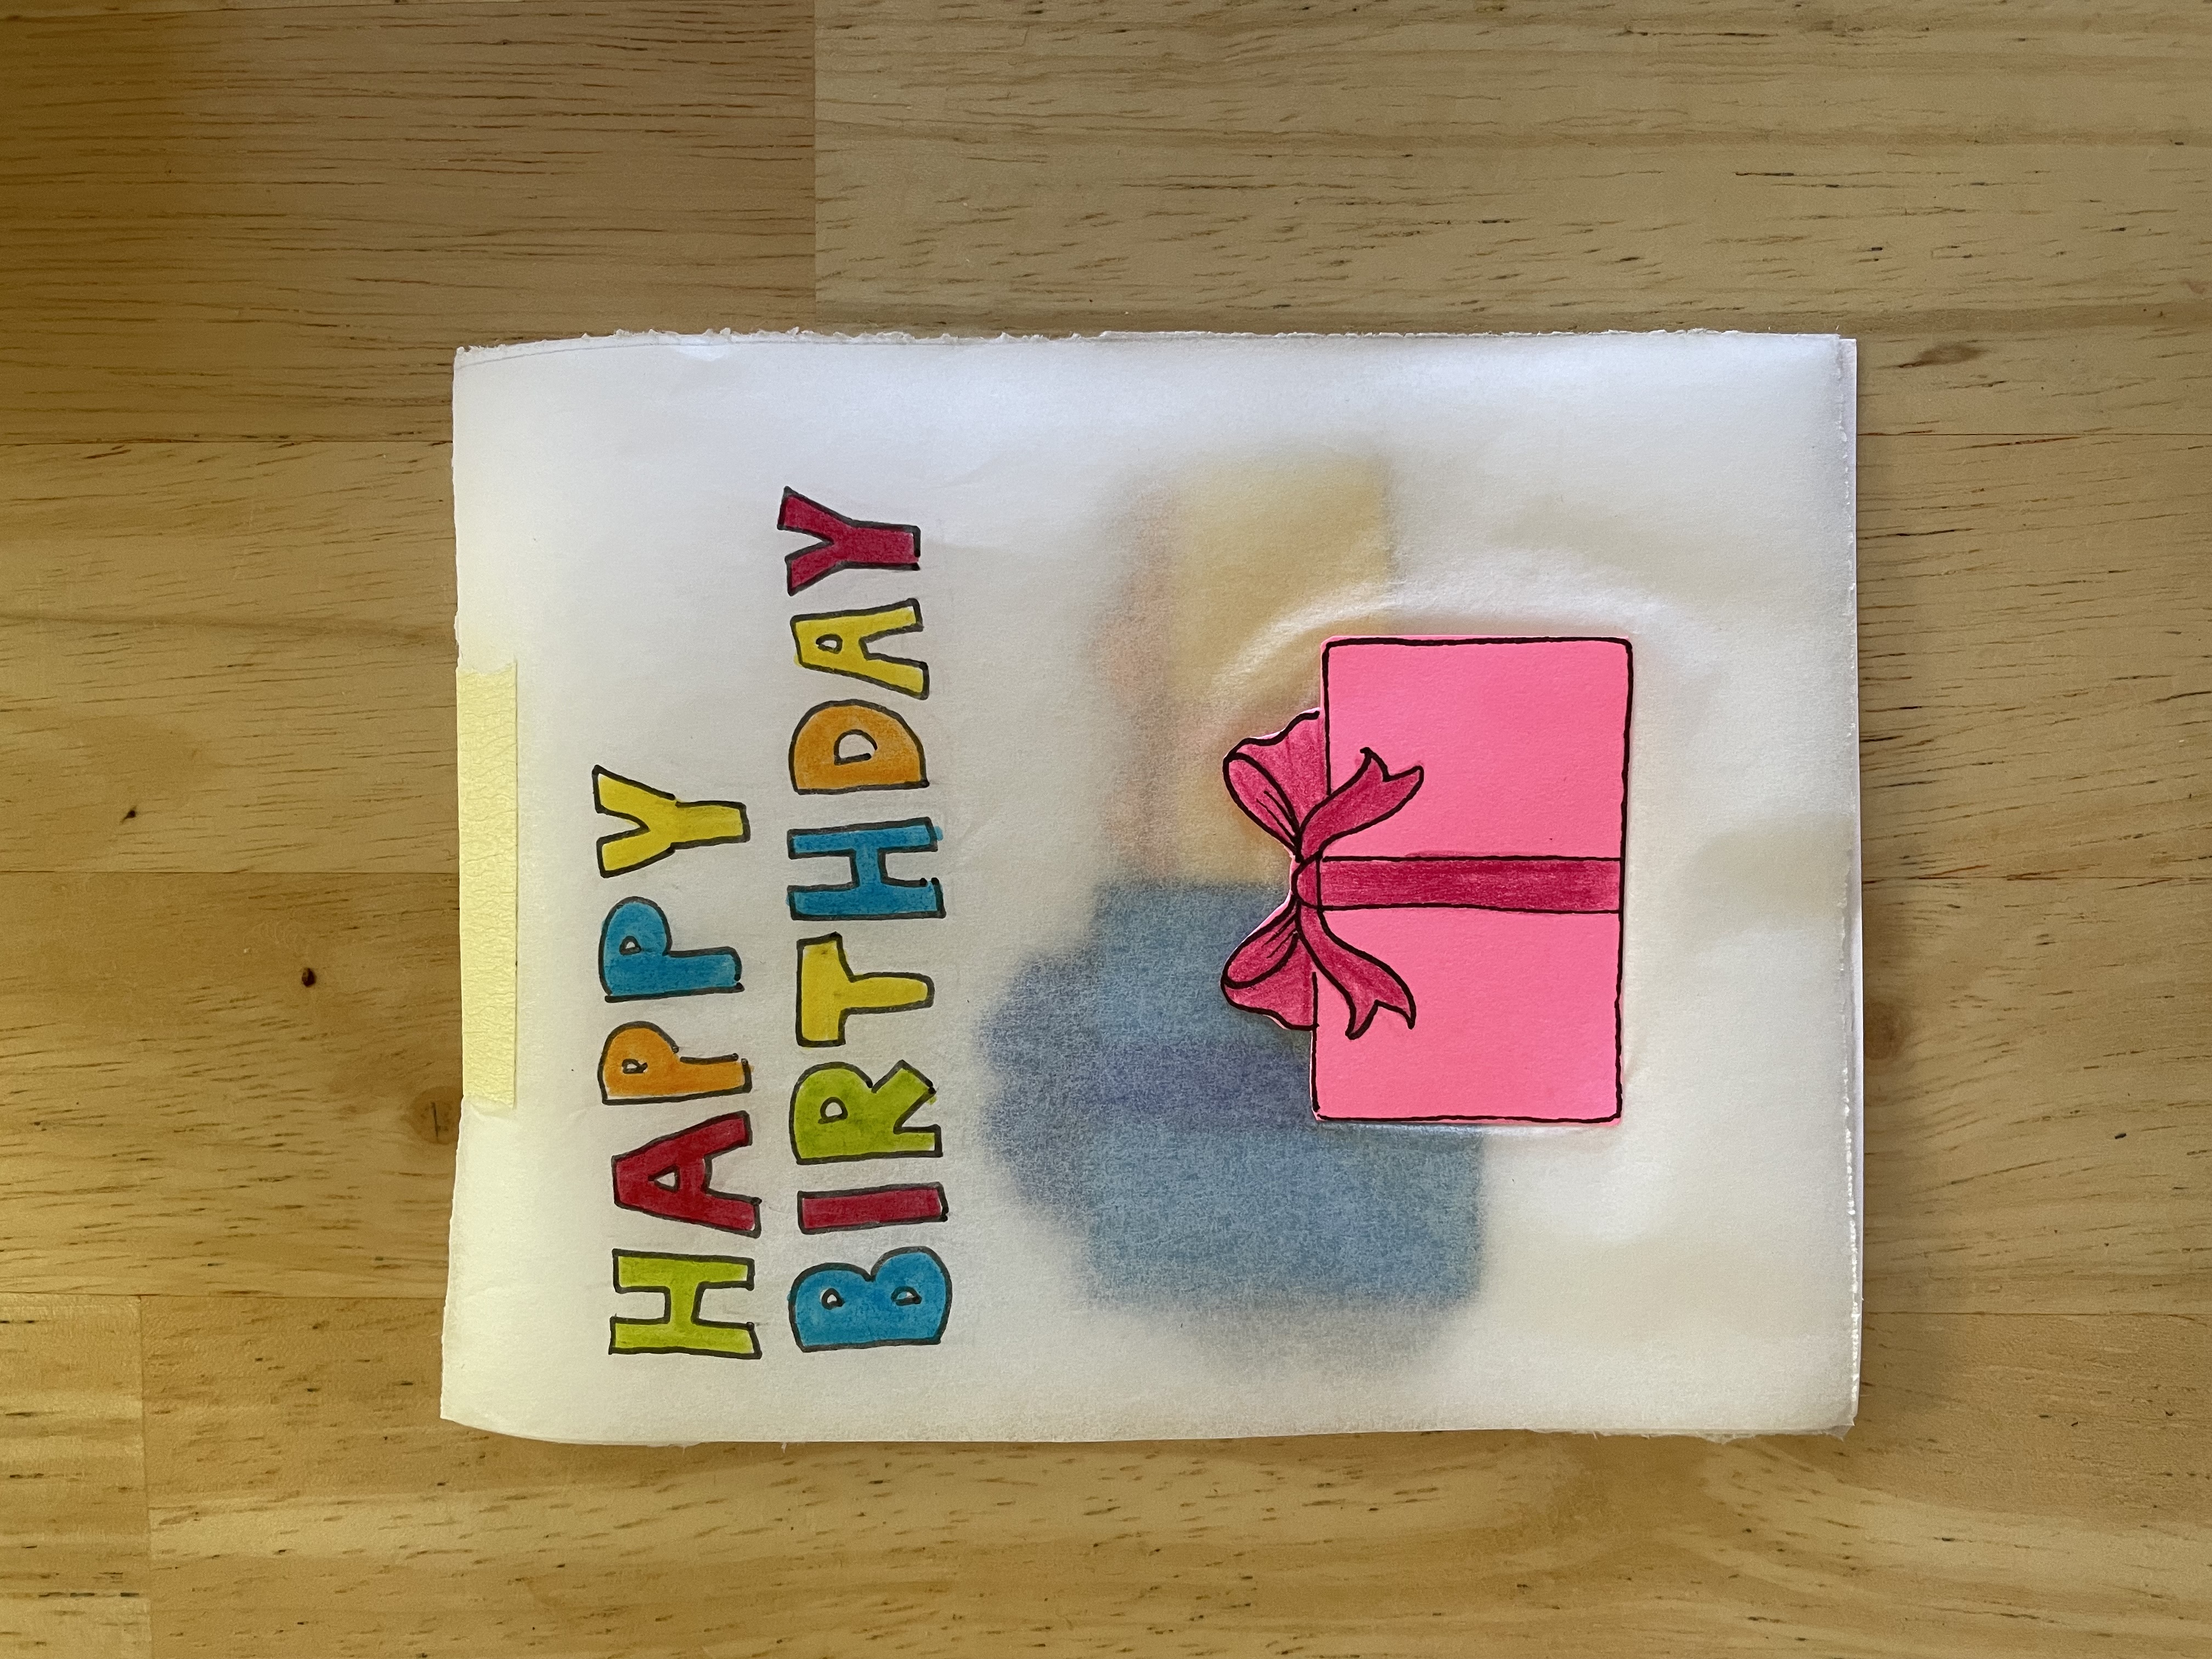 top layer of card, says 'happy birhday' and shows three gifts on vellum paper